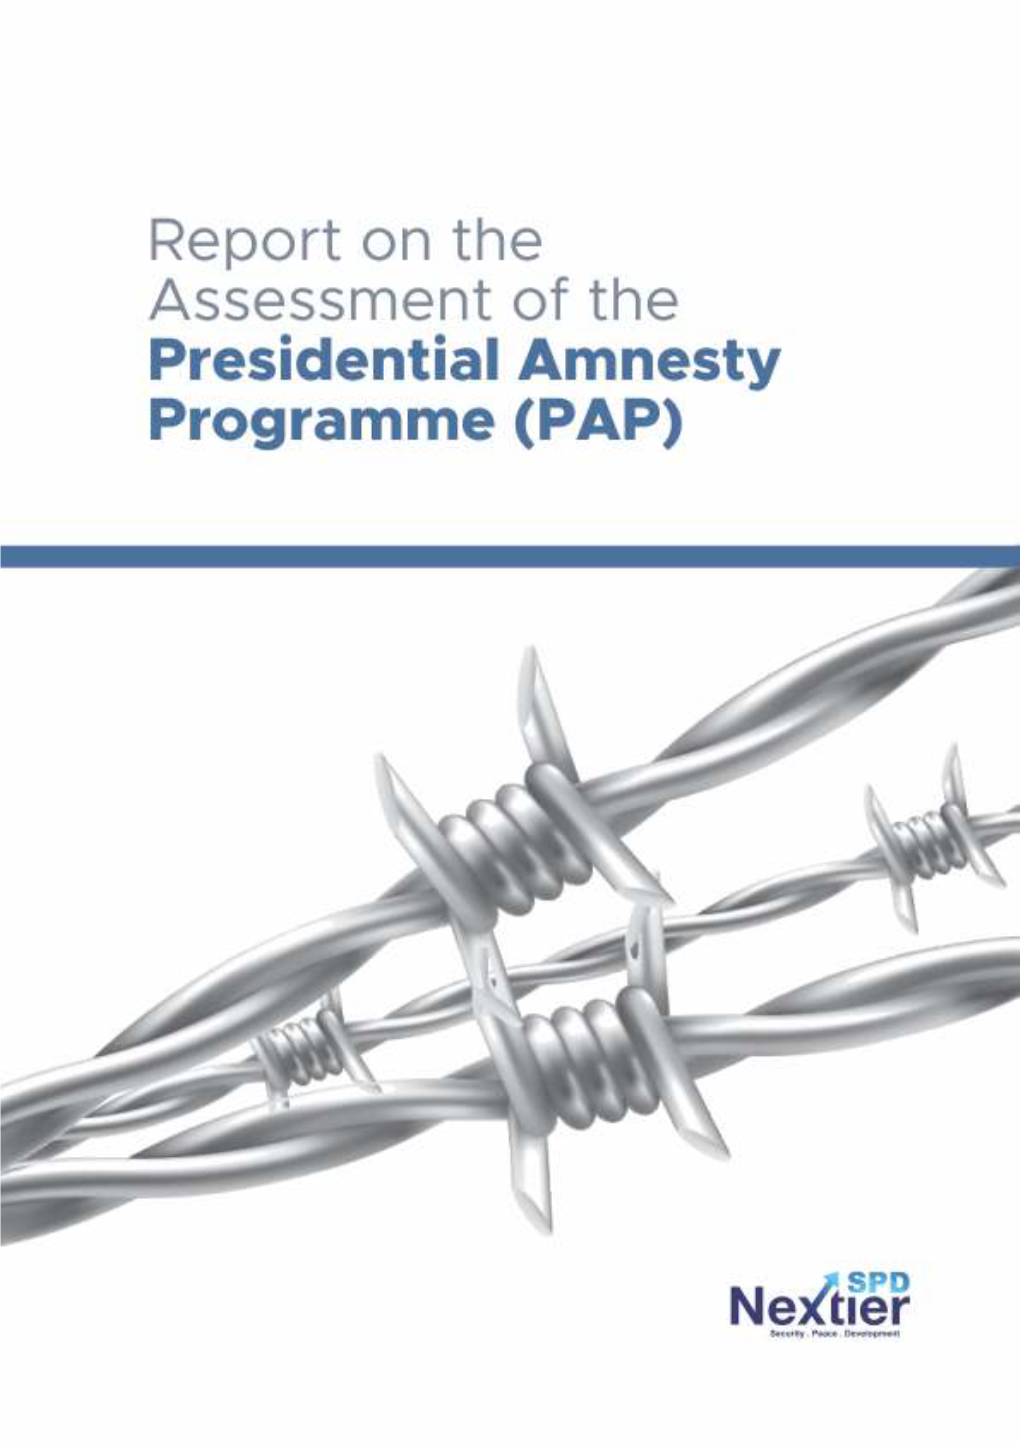 Report on the Assessment of the Presidential Amnesty Programme (PAP)